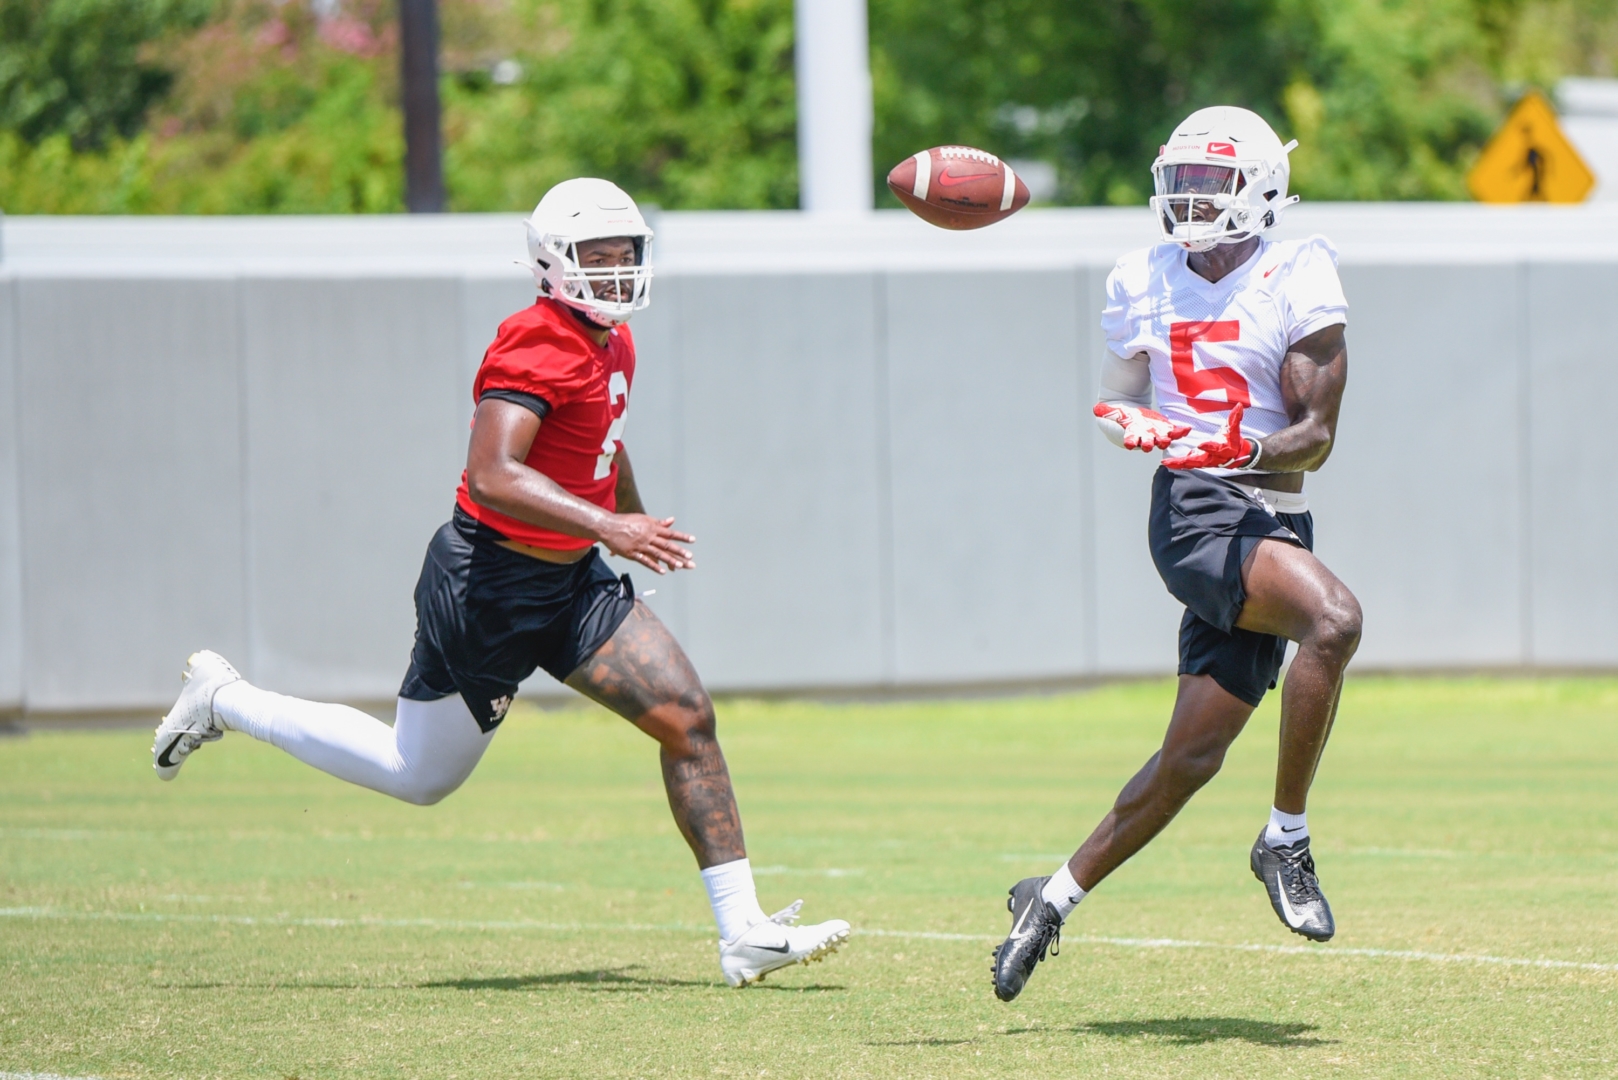 The UH football team practices in preparation for the 2020 season. Four of the Cougars' games have been postponed or canceled because of coronavirus issues. | Courtesy of UH athletics